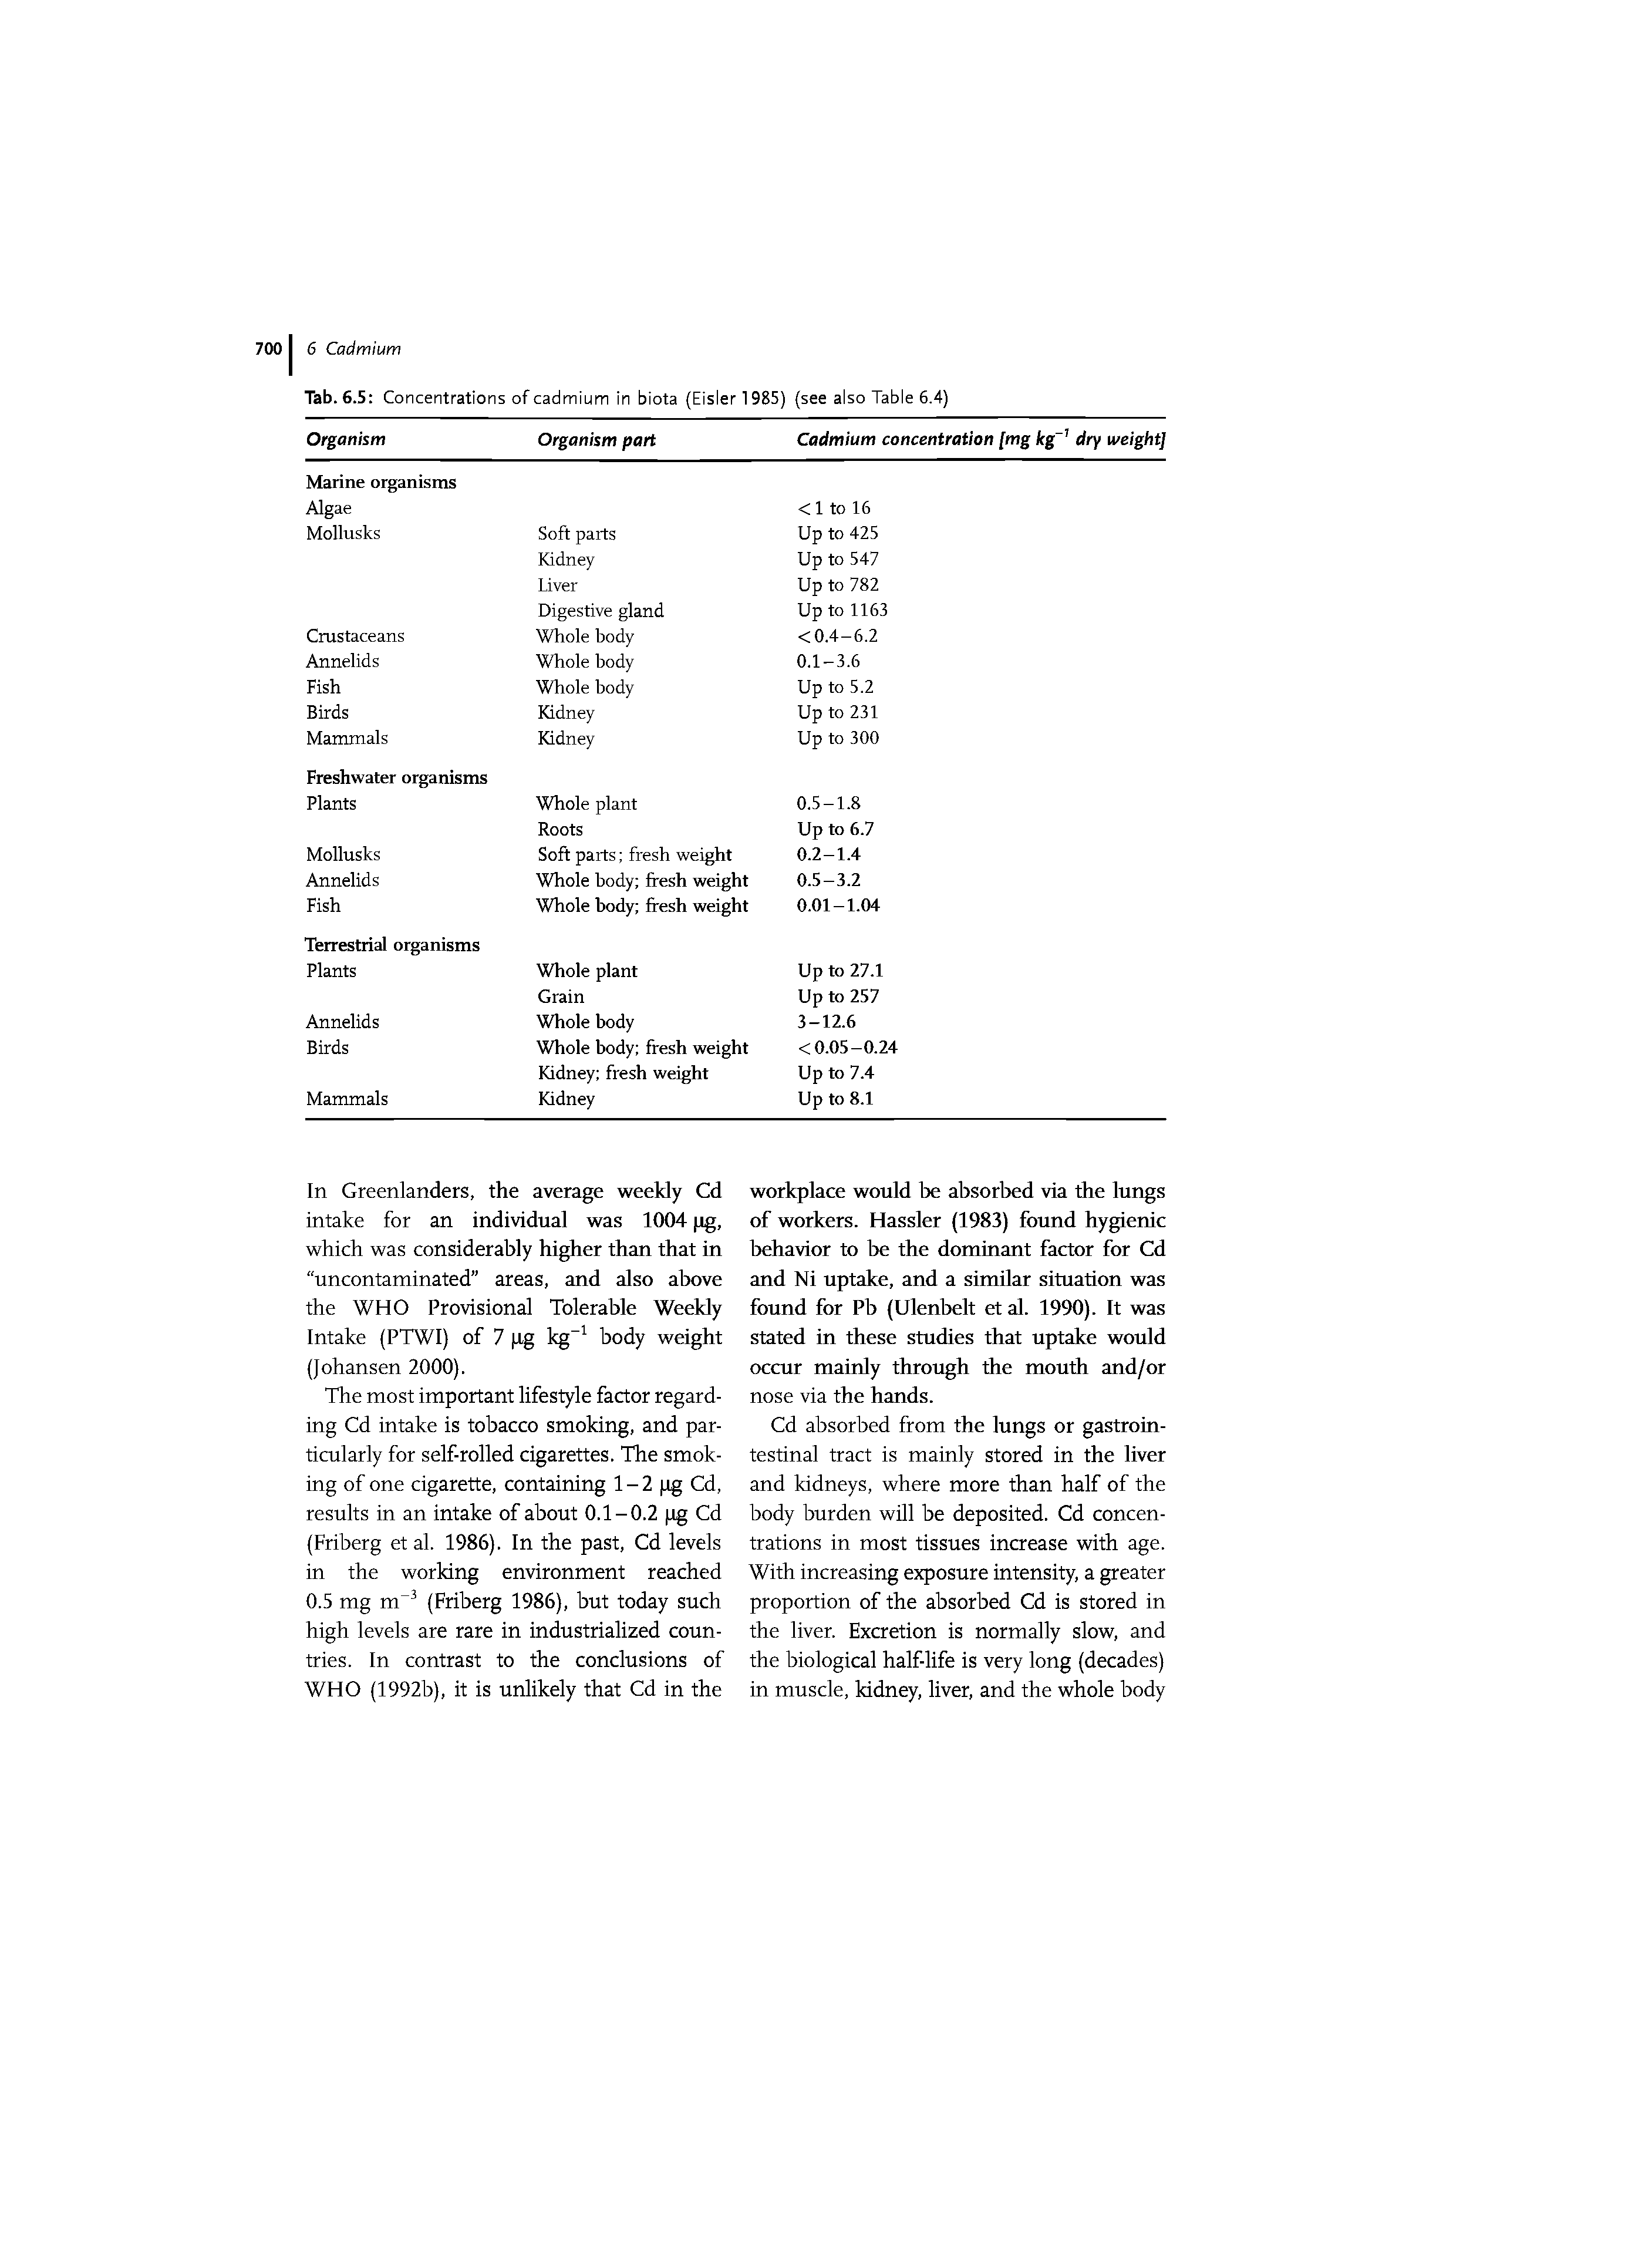 Tab. 6.5 Concentrations of cadmium in biota (Eisler 1985) (see also Table 6.4)...